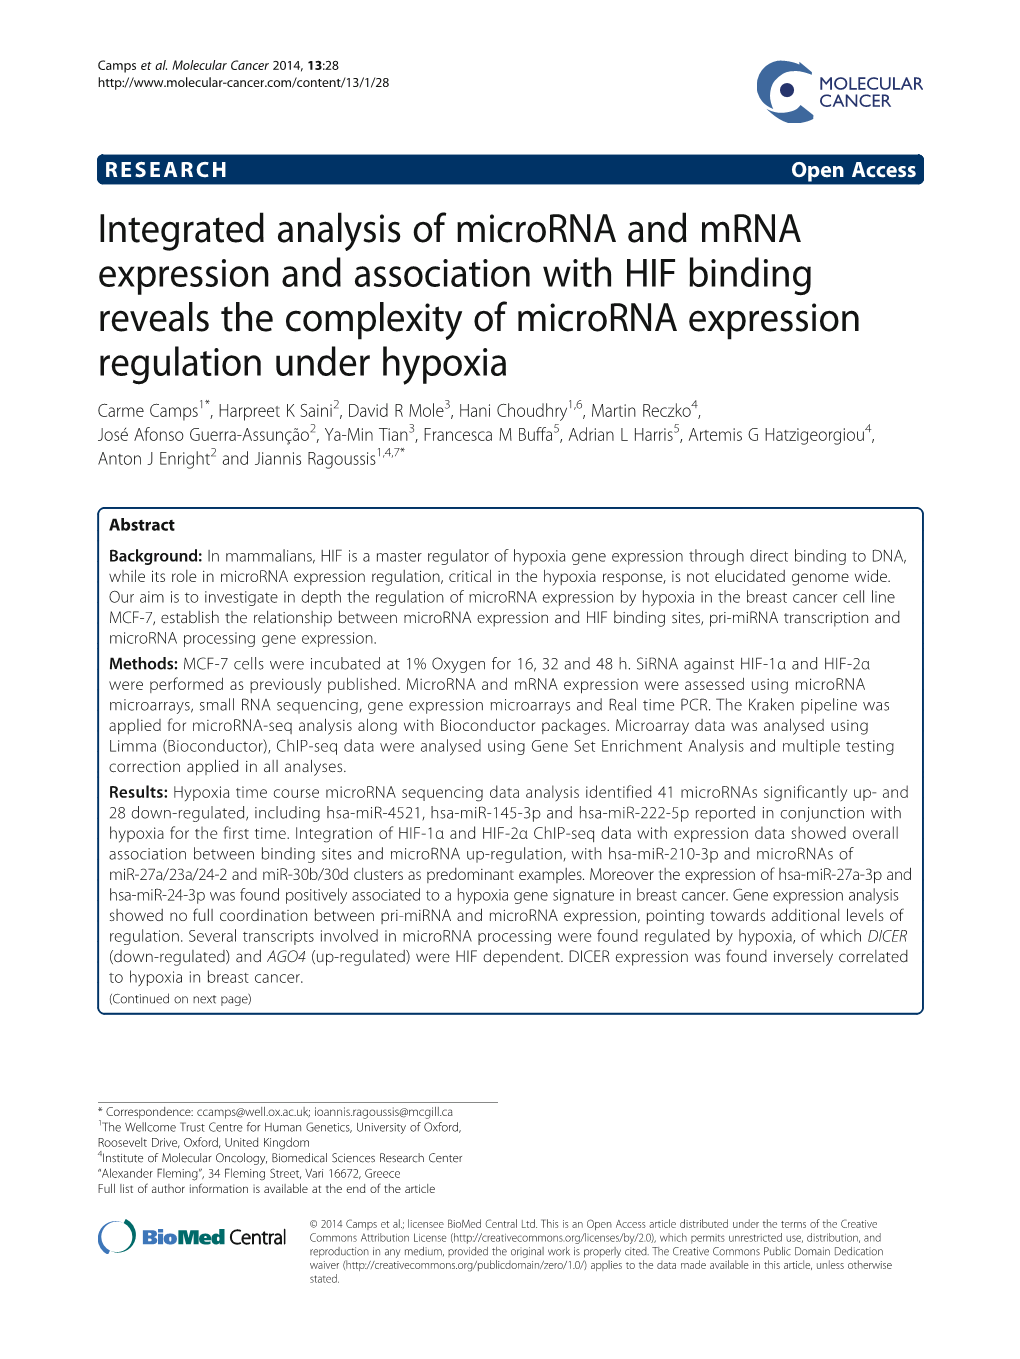 Integrated Analysis of Microrna and Mrna Expression and Association with HIF Binding Reveals the Complexity of Microrna Expressi